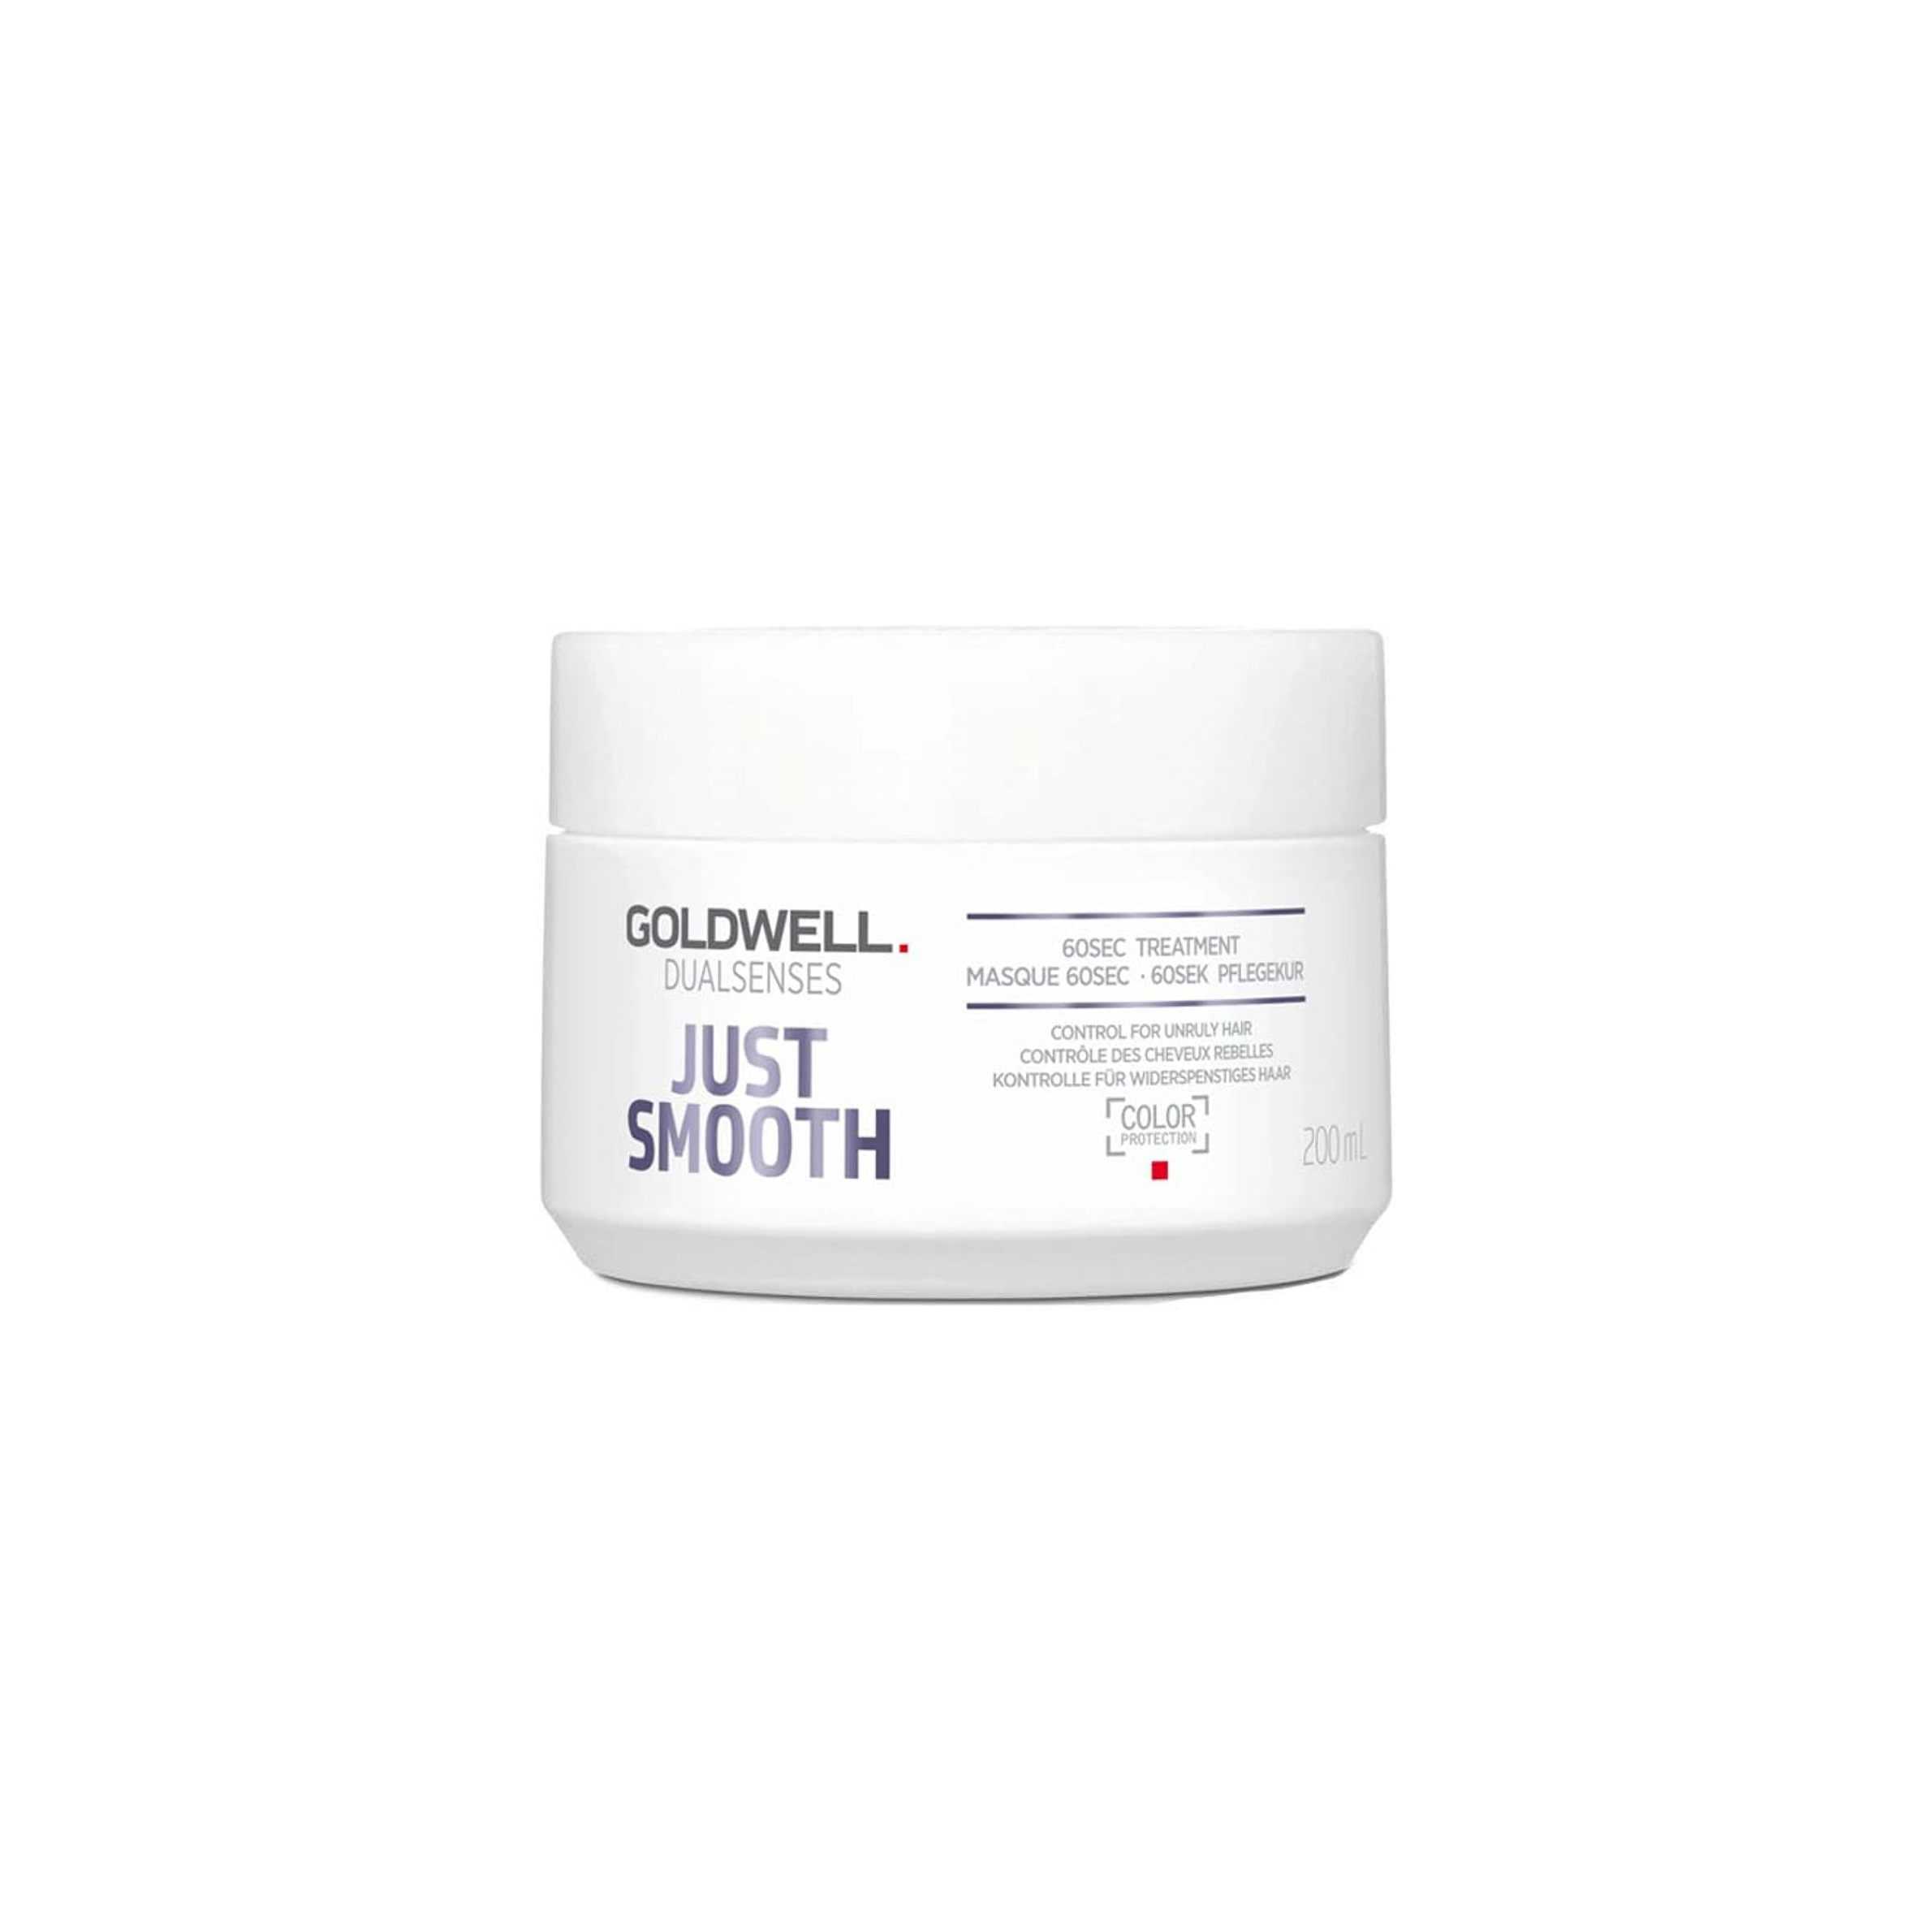 Goldwell Just Smooth 60 Second Treatment